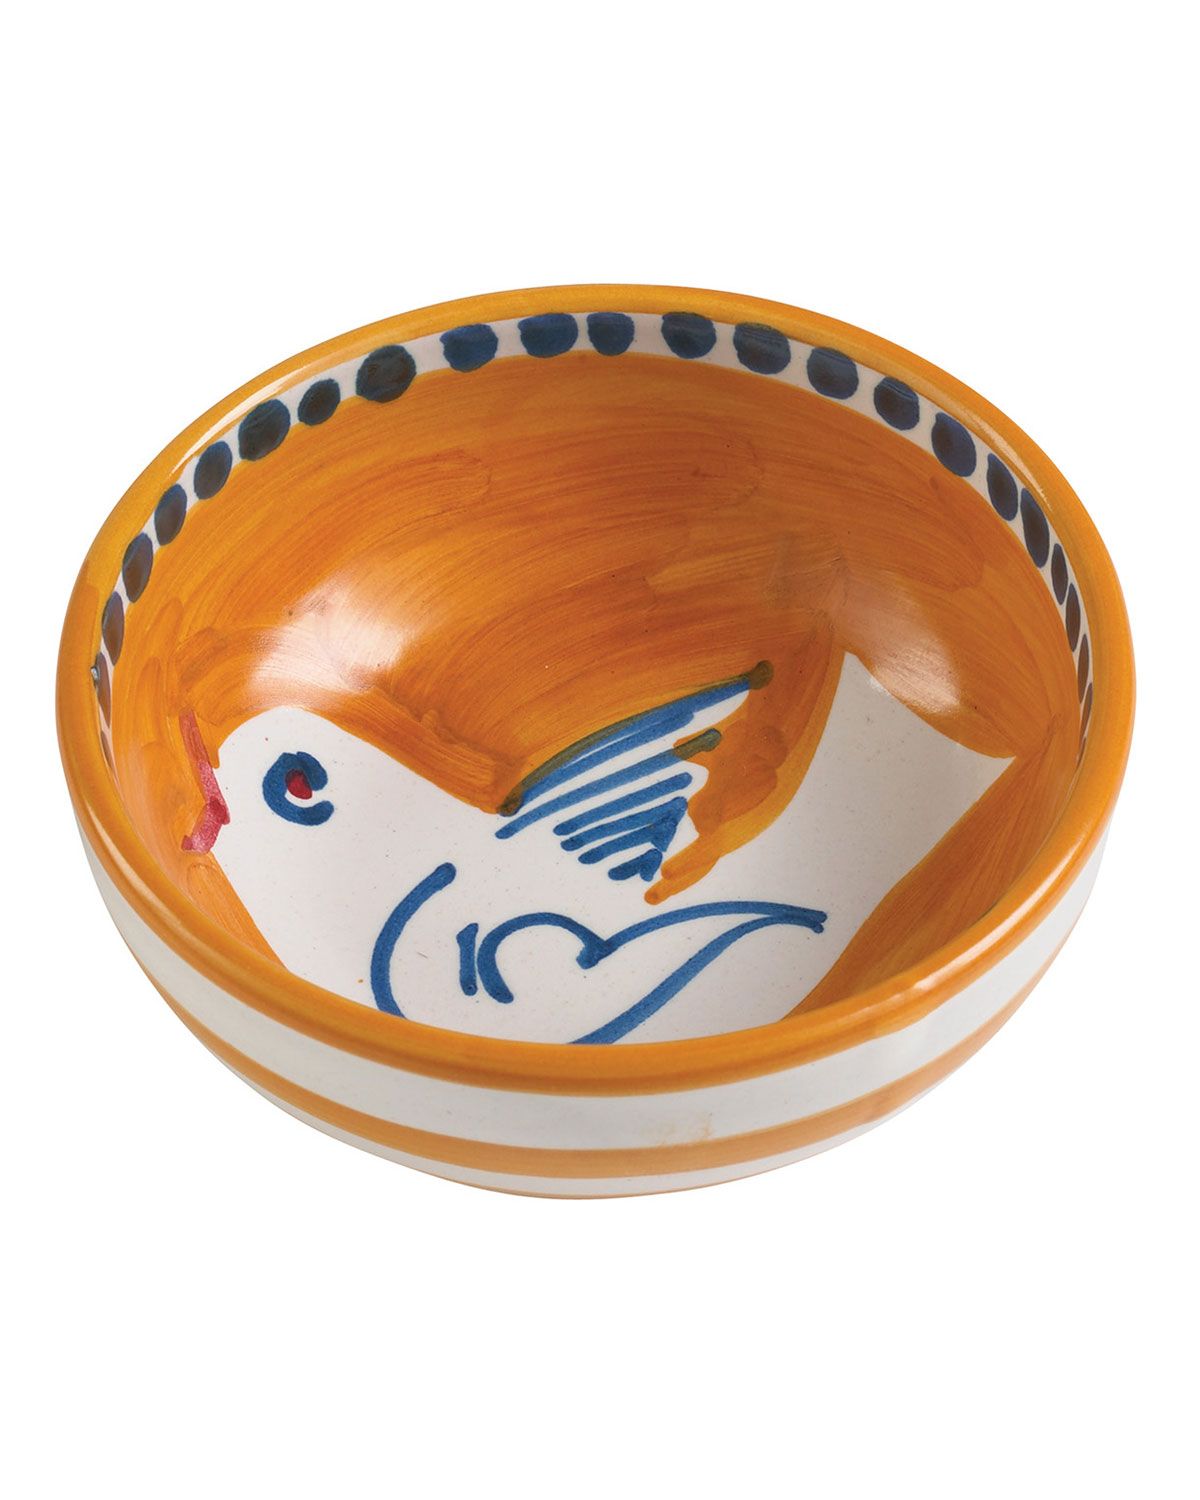 Campagna Uccello Olive Oil Bowl